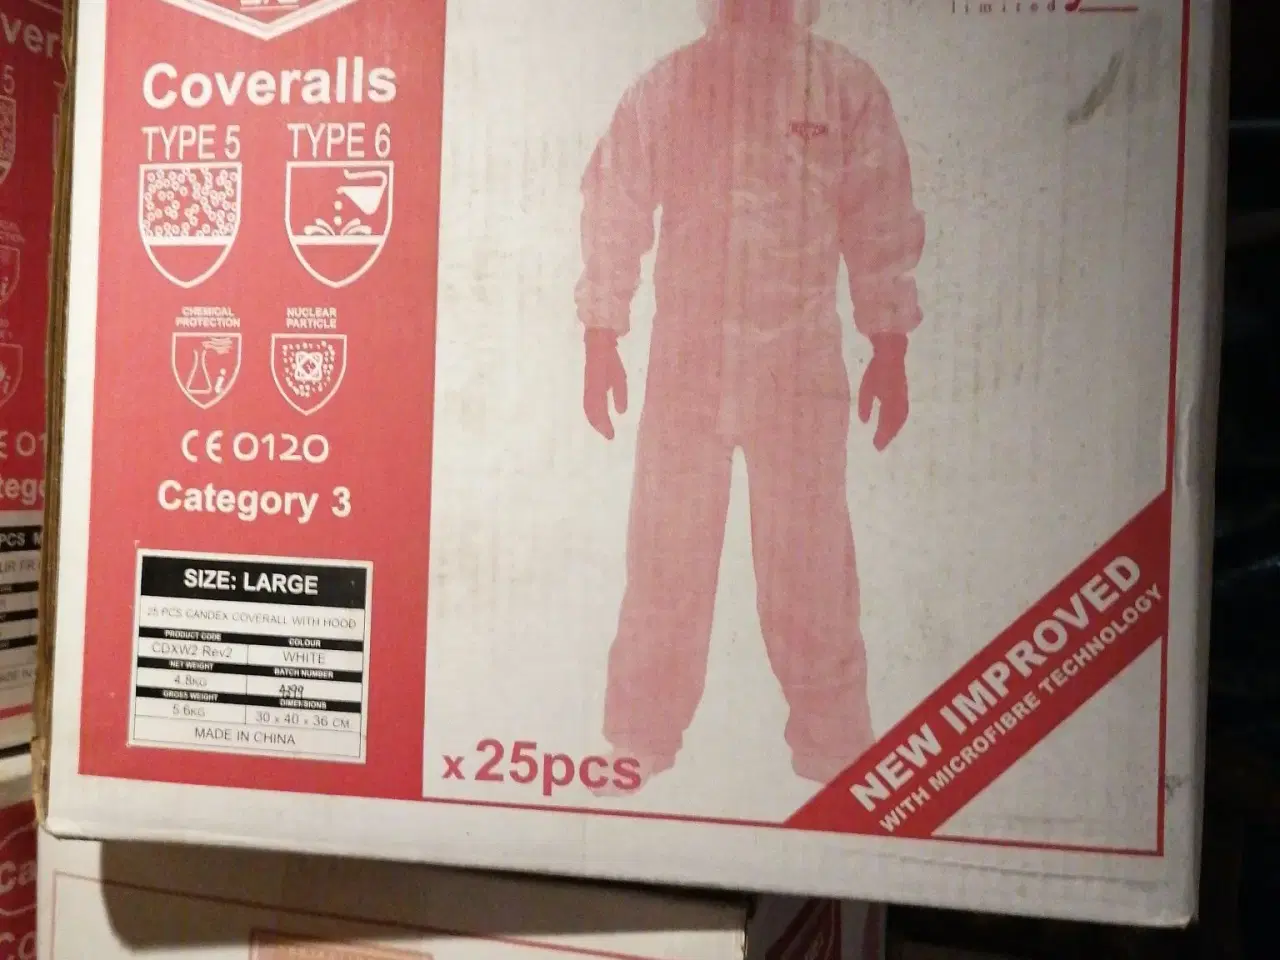 Billede 1 - Engangsdragt candex coverall ny